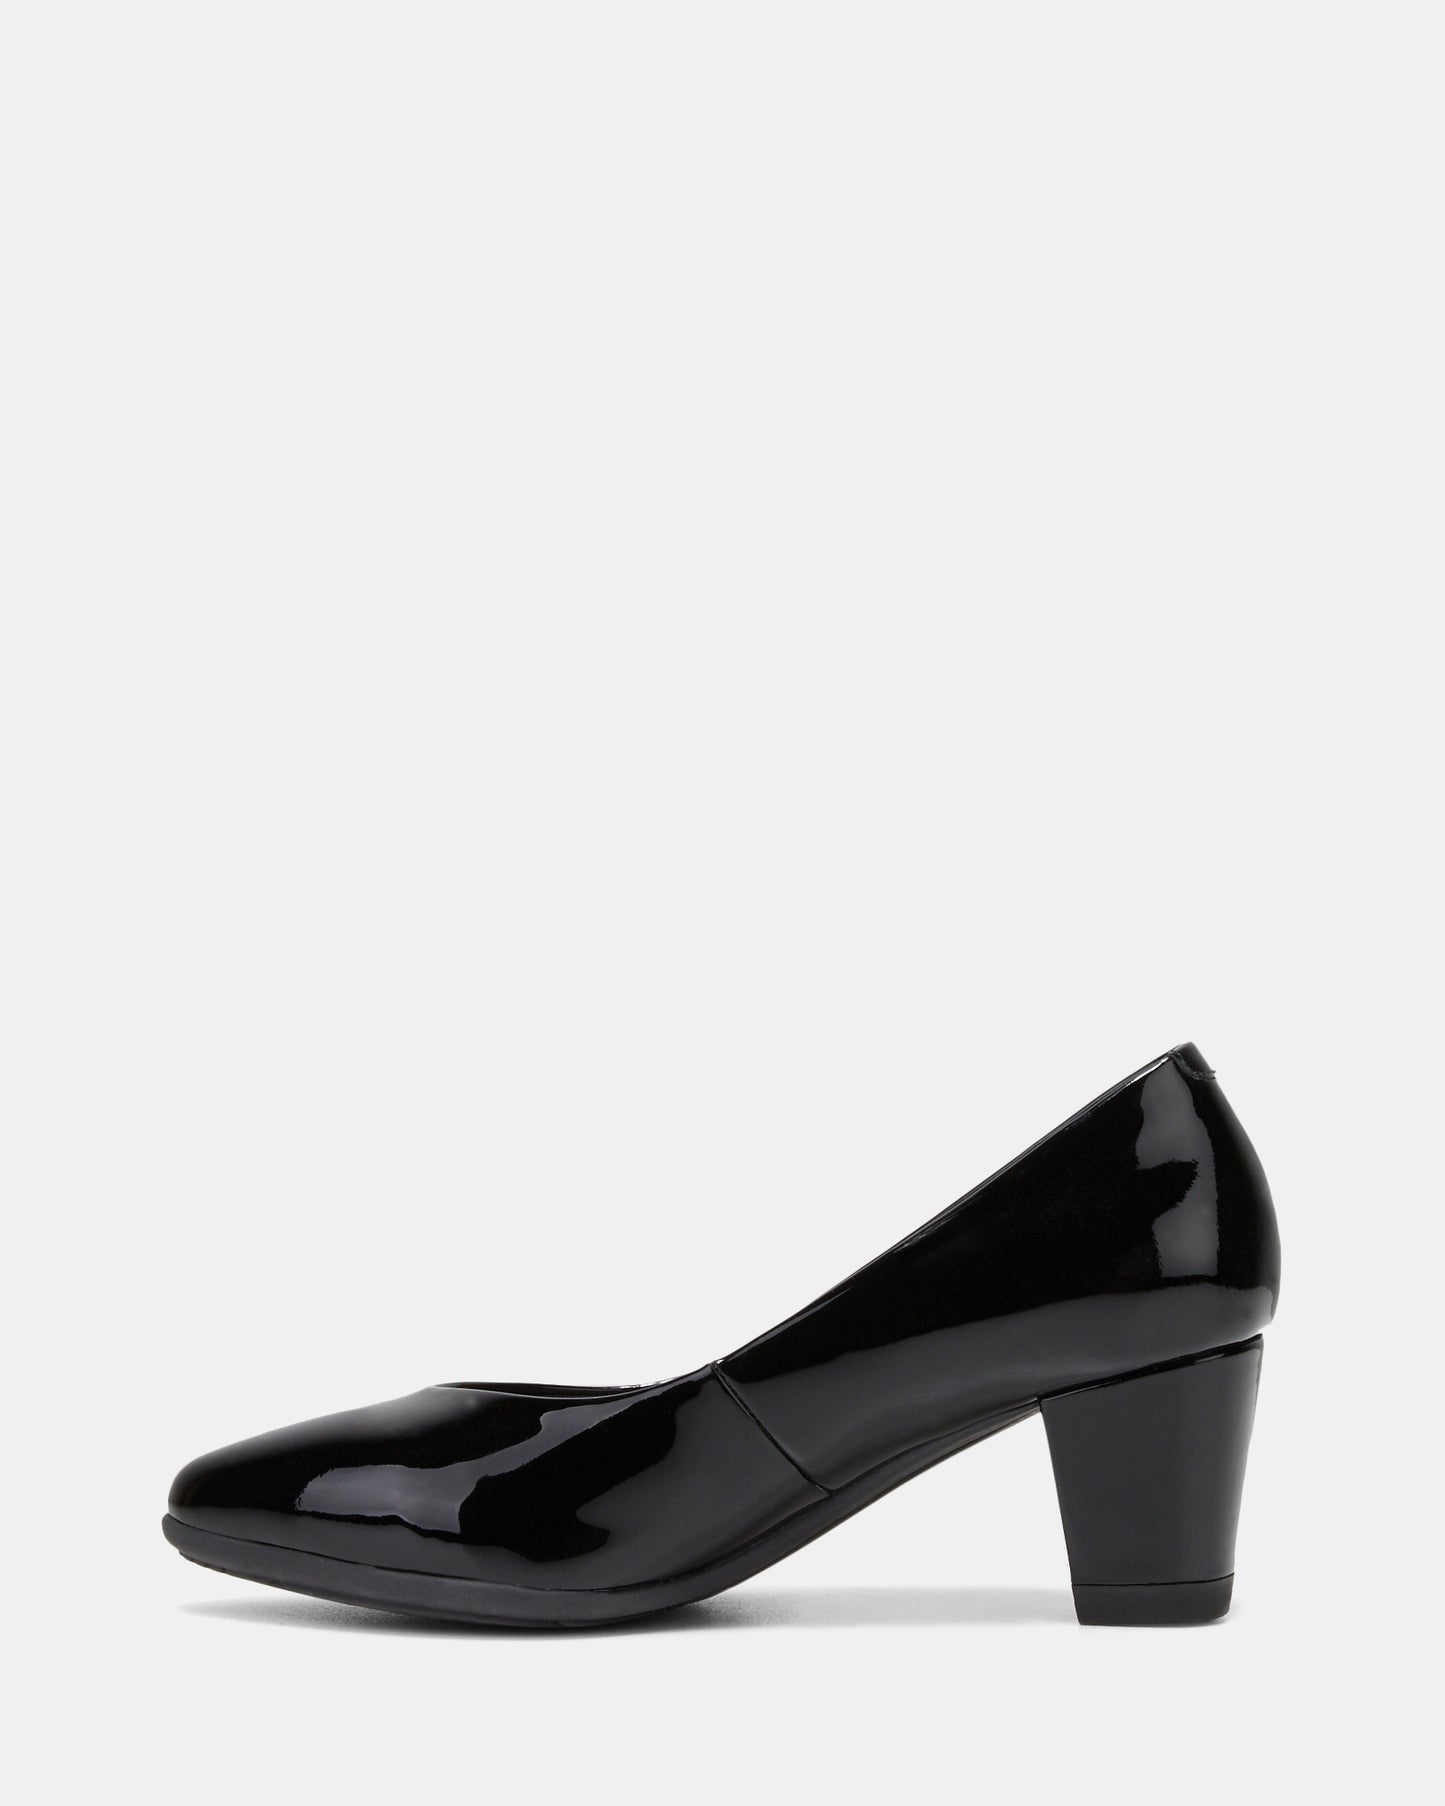 The Point Black Patent